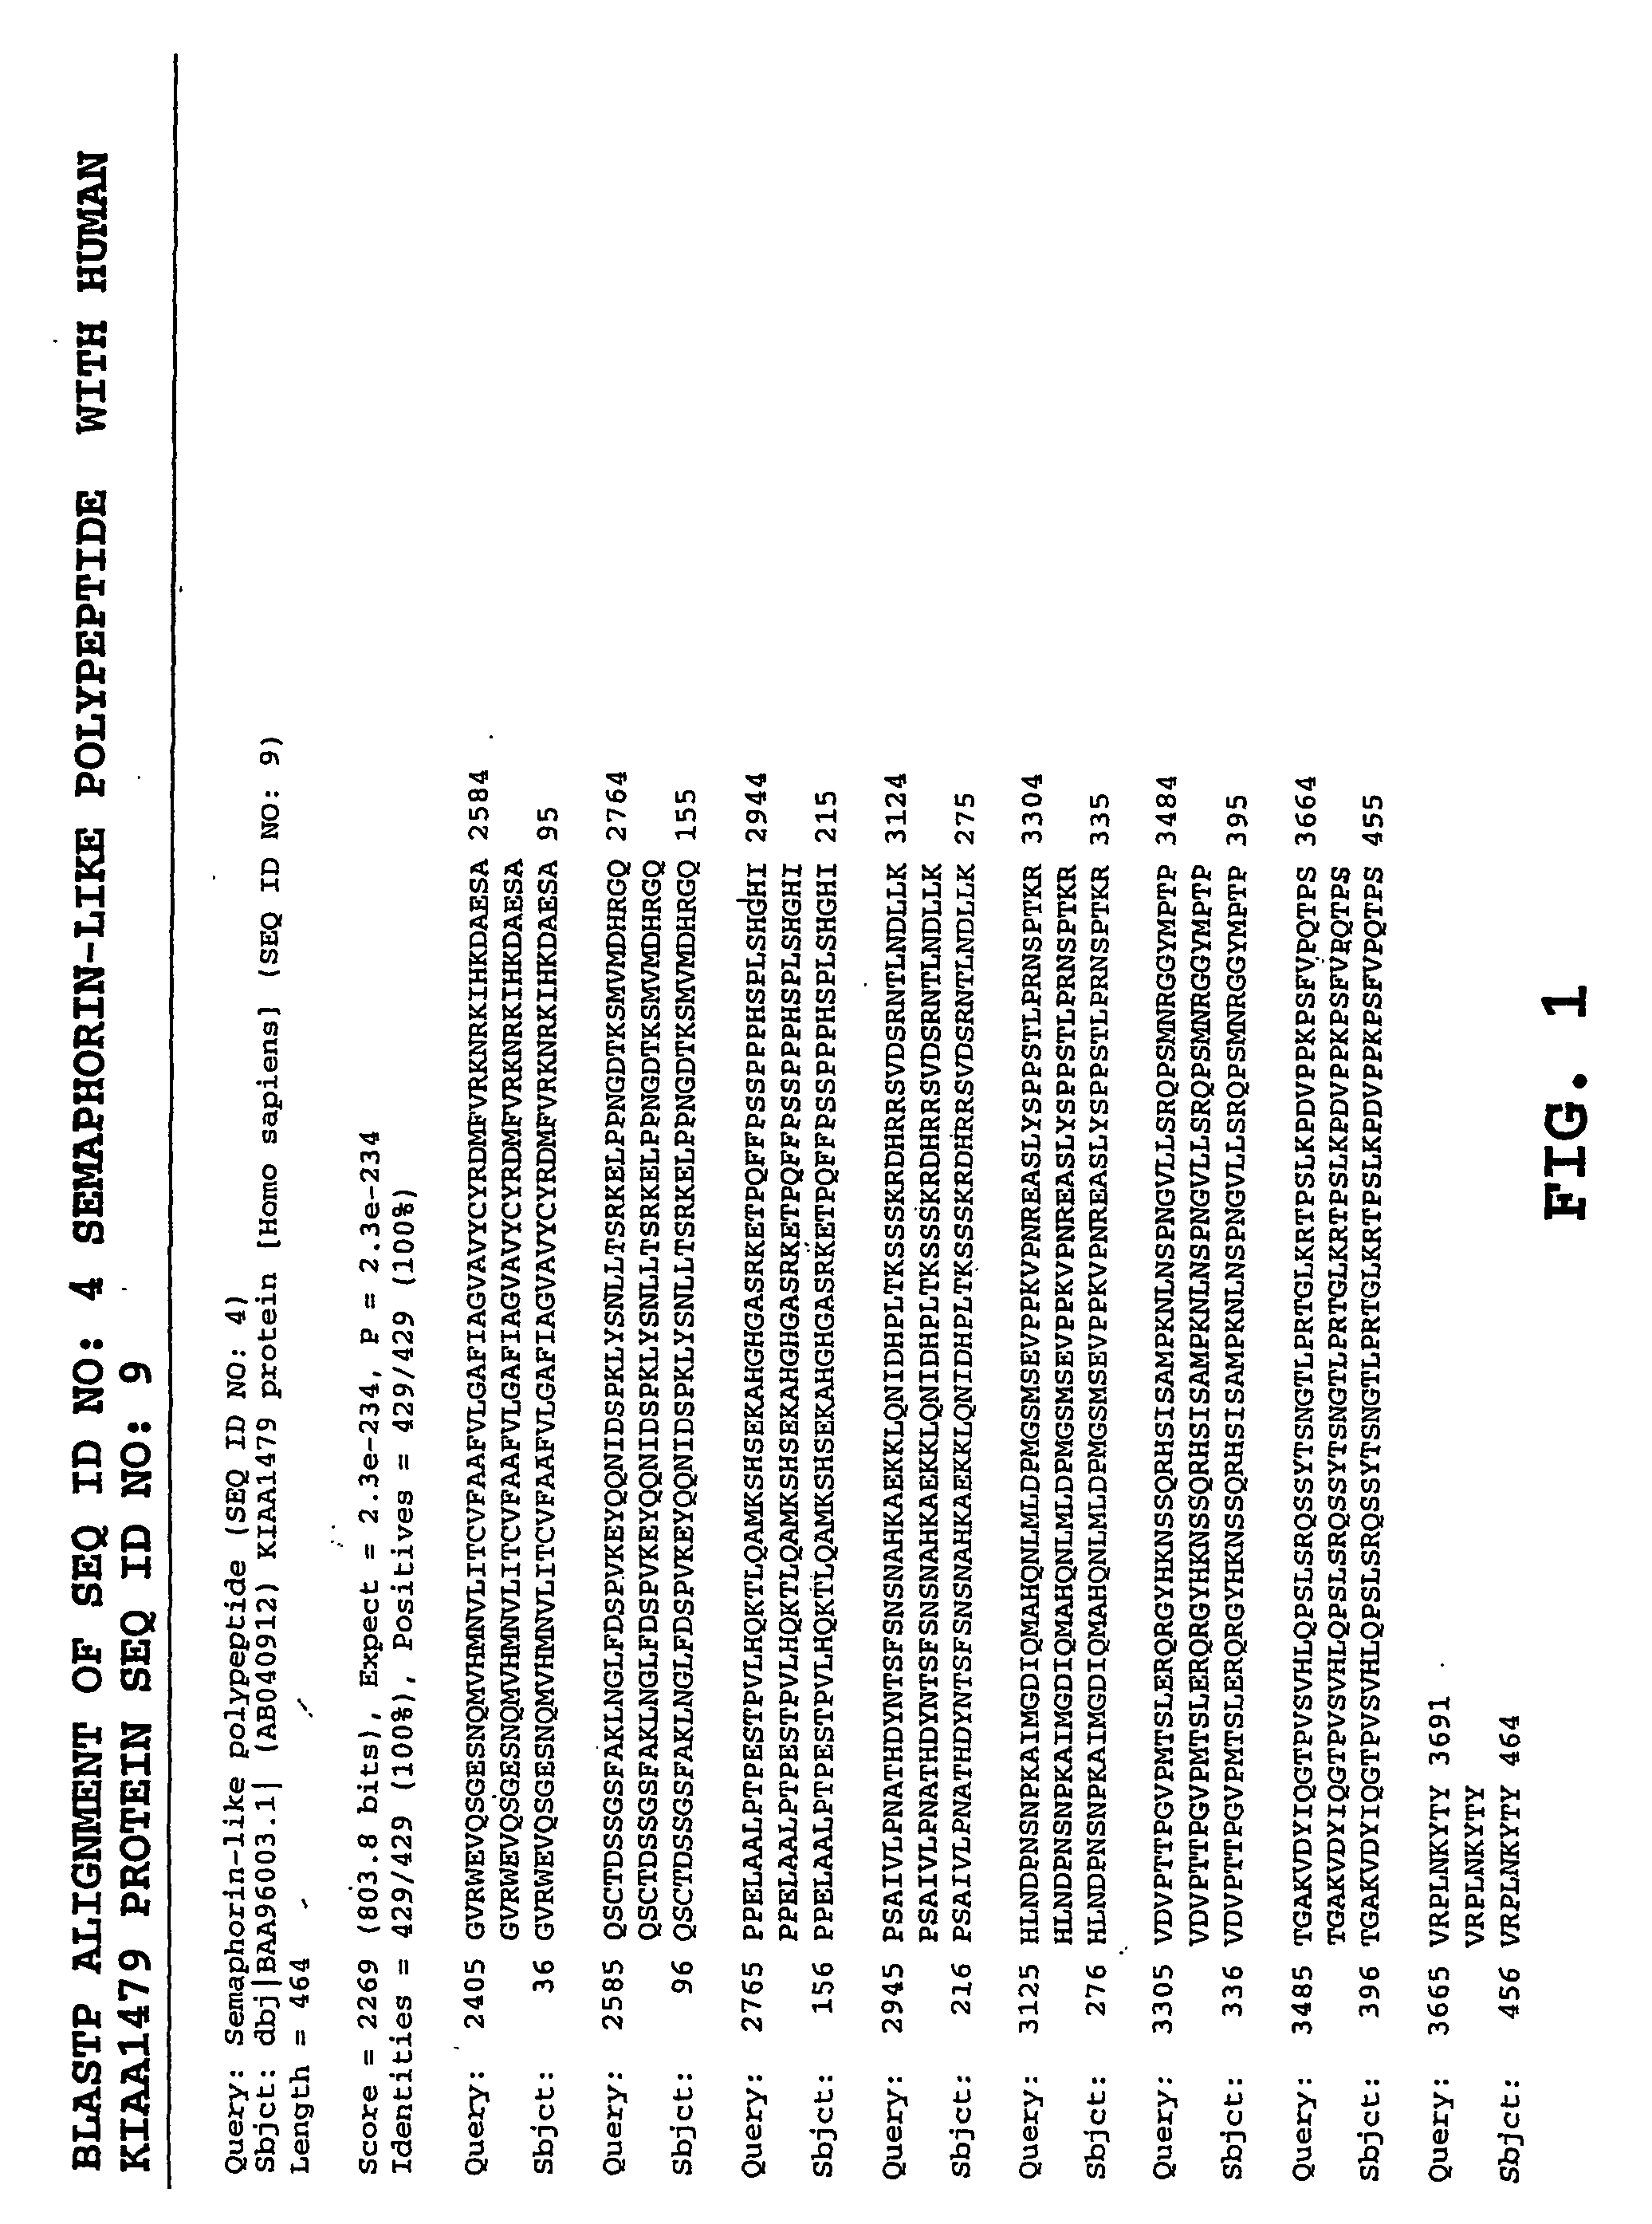 Methods and materials relating to semaphorin-like polypeptides and polynucleotides